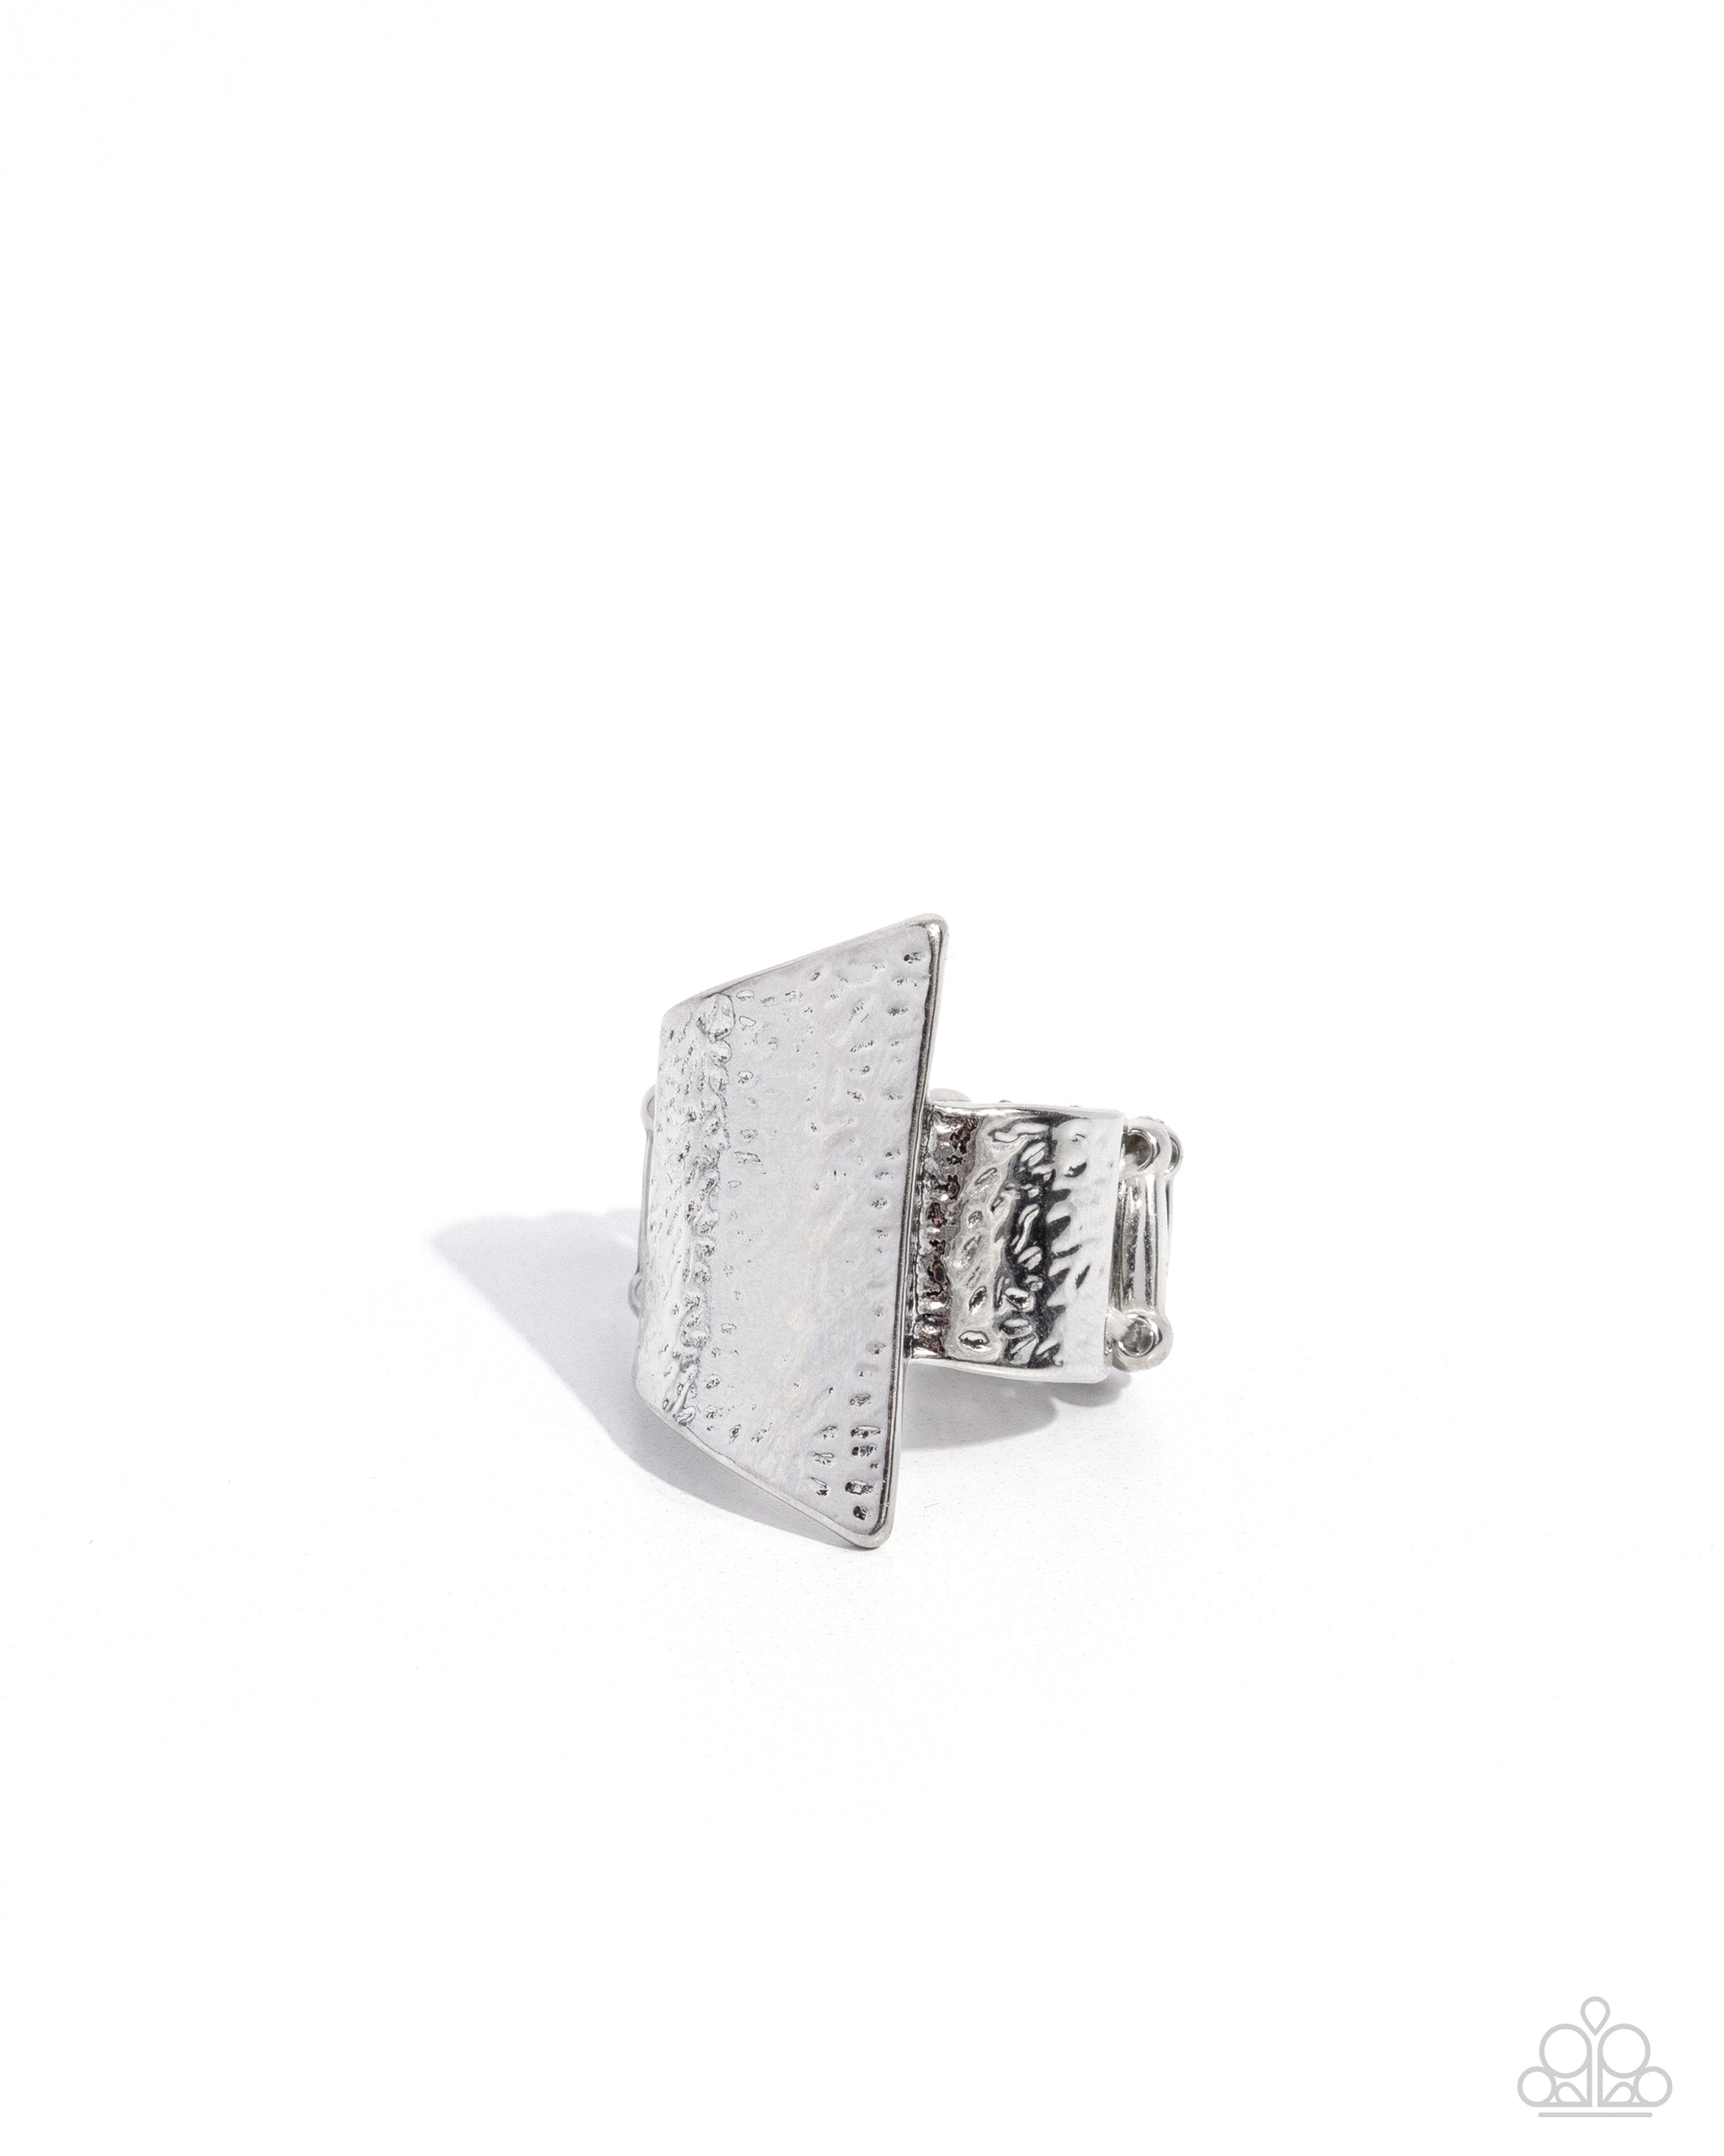 <p>Hammered in rippling details, two mismatched silver frames asymmetrically overlap across the finger for an edgy look. Features a stretchy band for a flexible fit.</p> <p><i> Sold as one individual ring.</i></p>